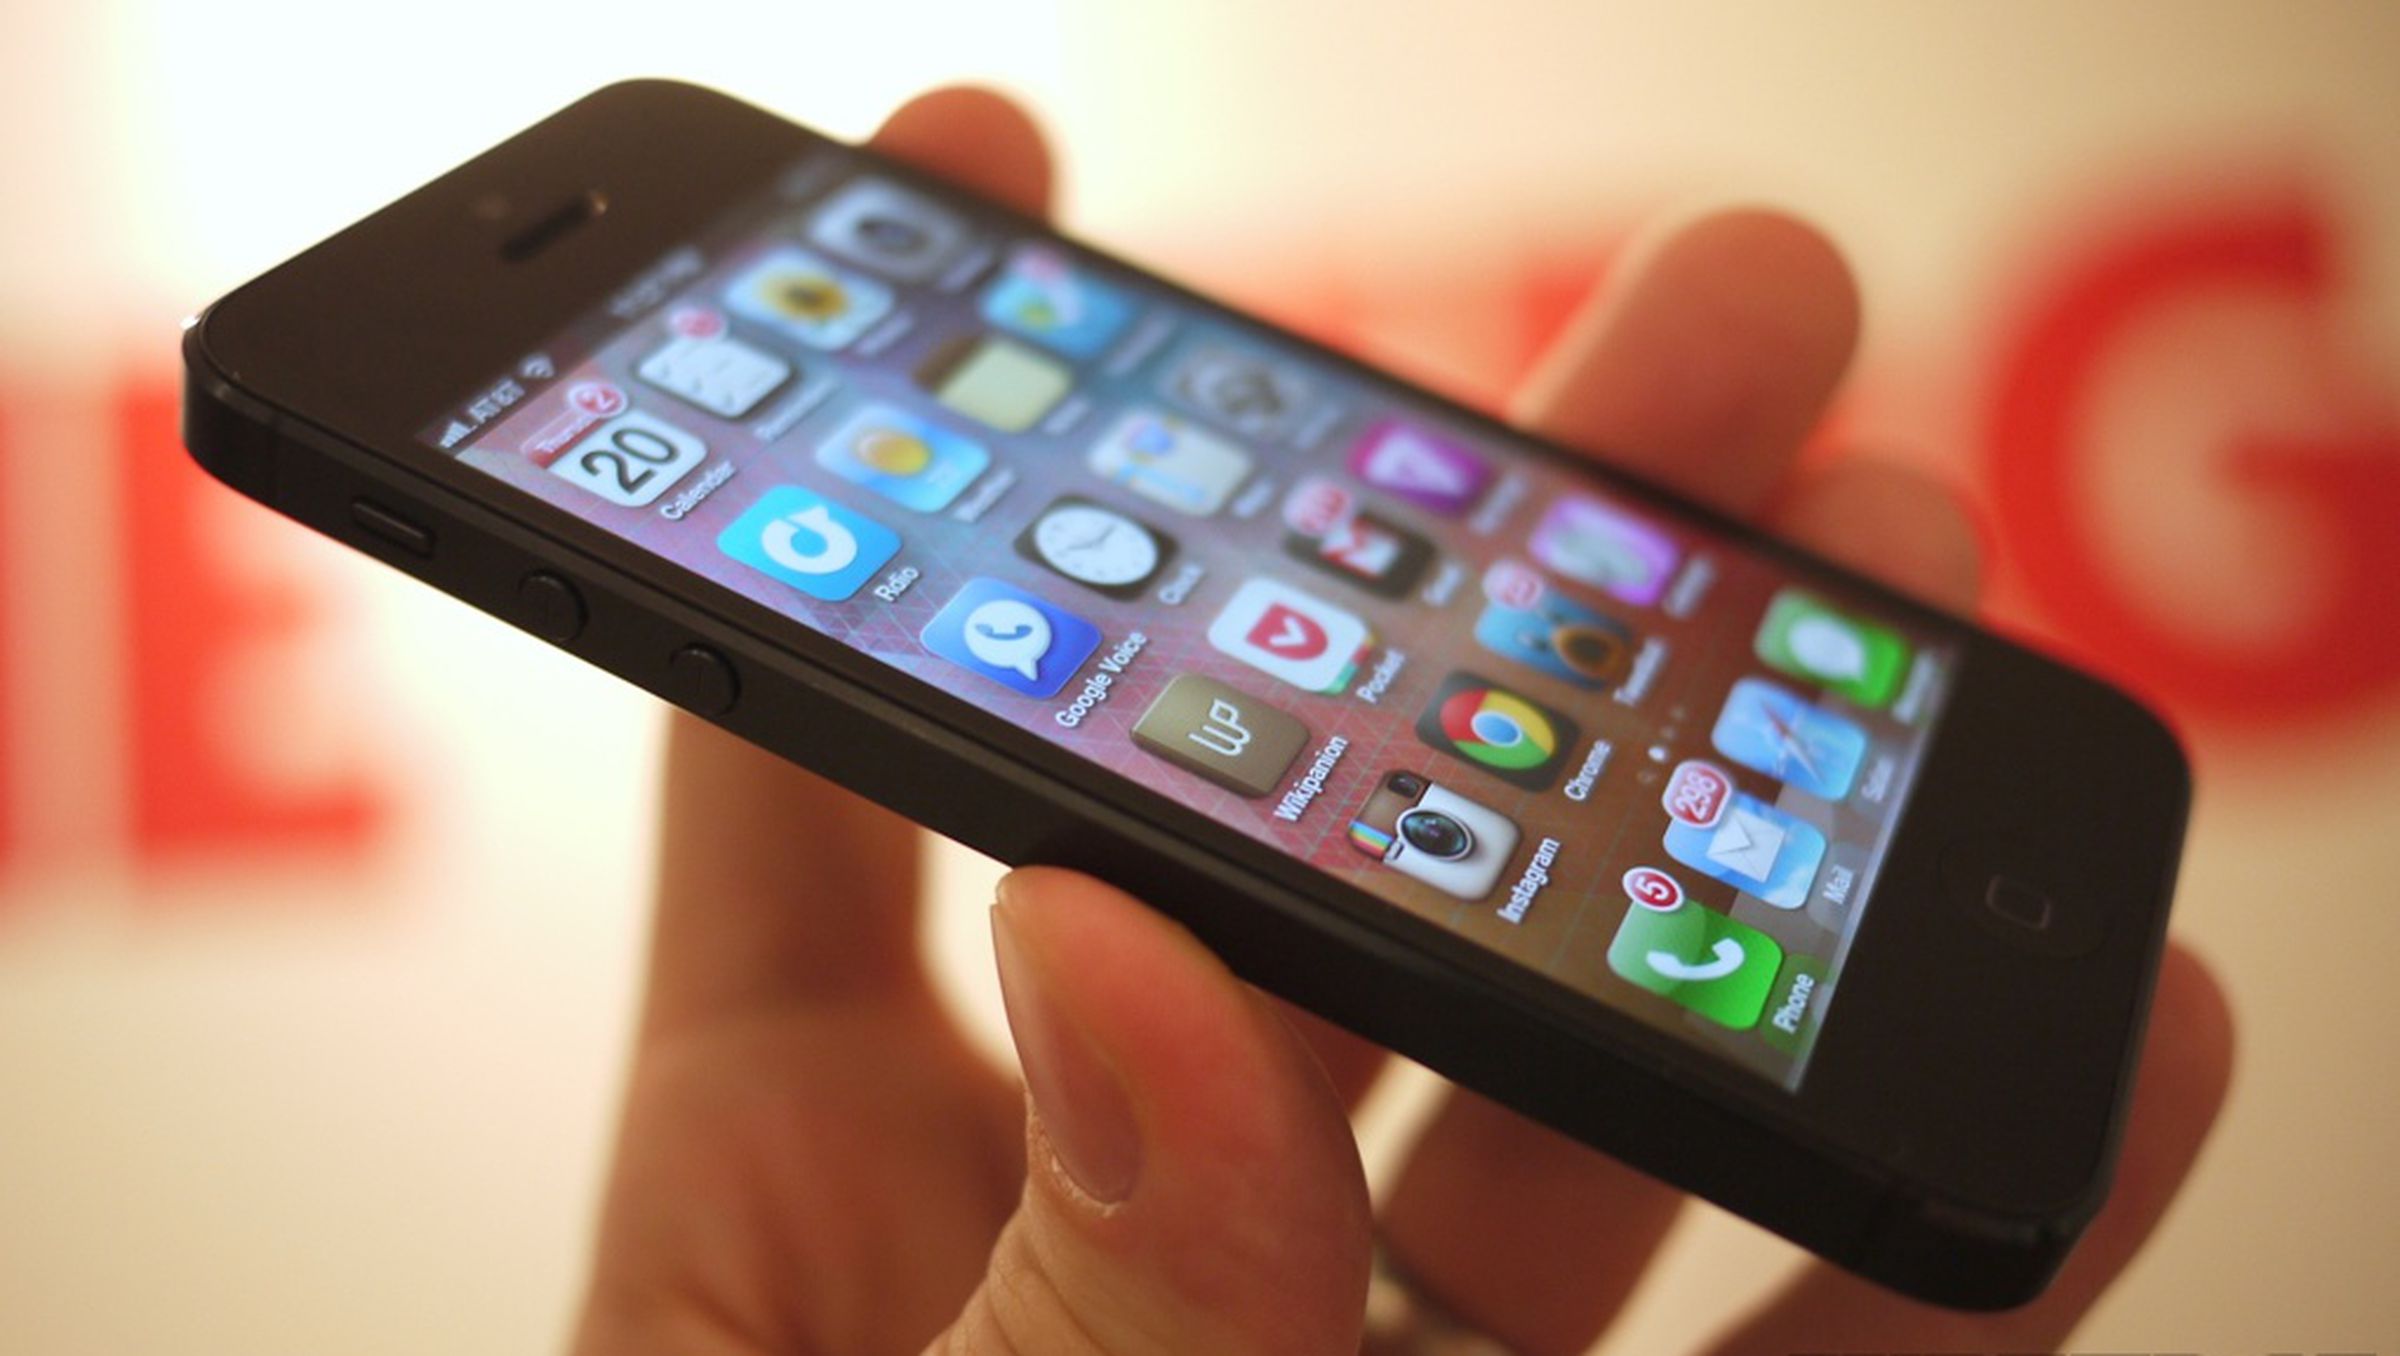 How To Remove Battery From IPhone 5 Without A Screwdriver